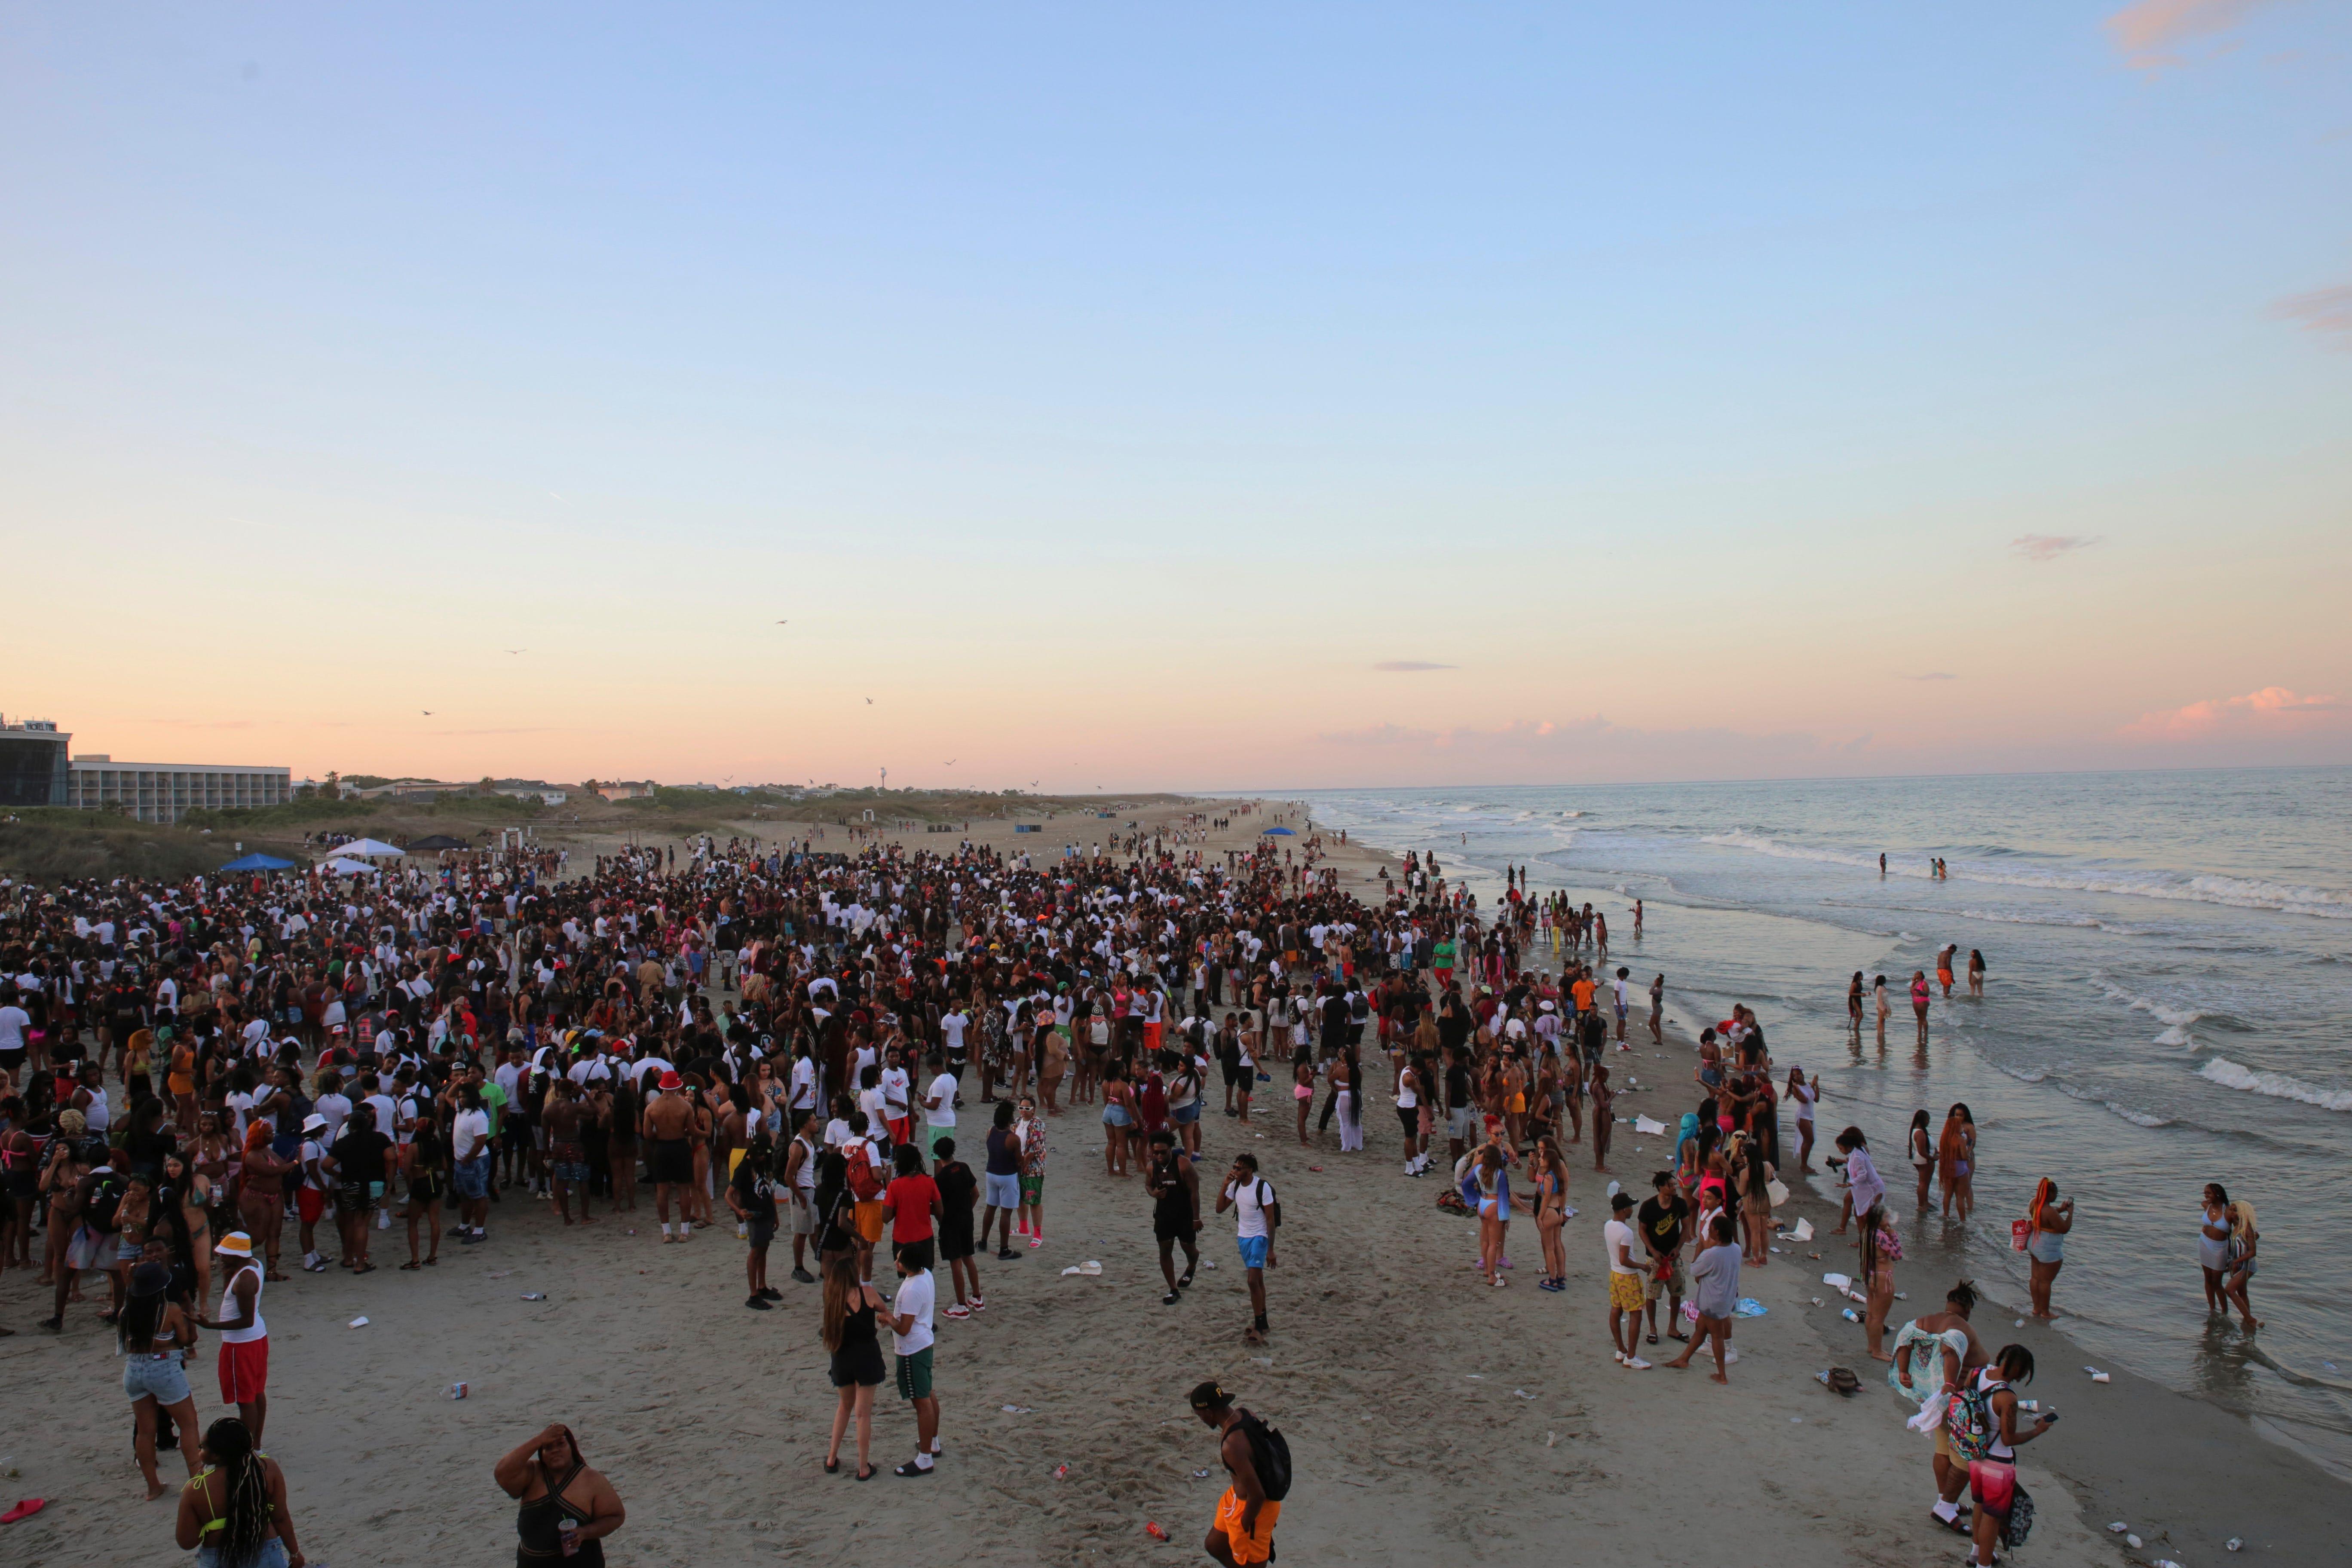 A large crowd of people enjoy the Tybee beach at sunset during Orange Crush on April 24.